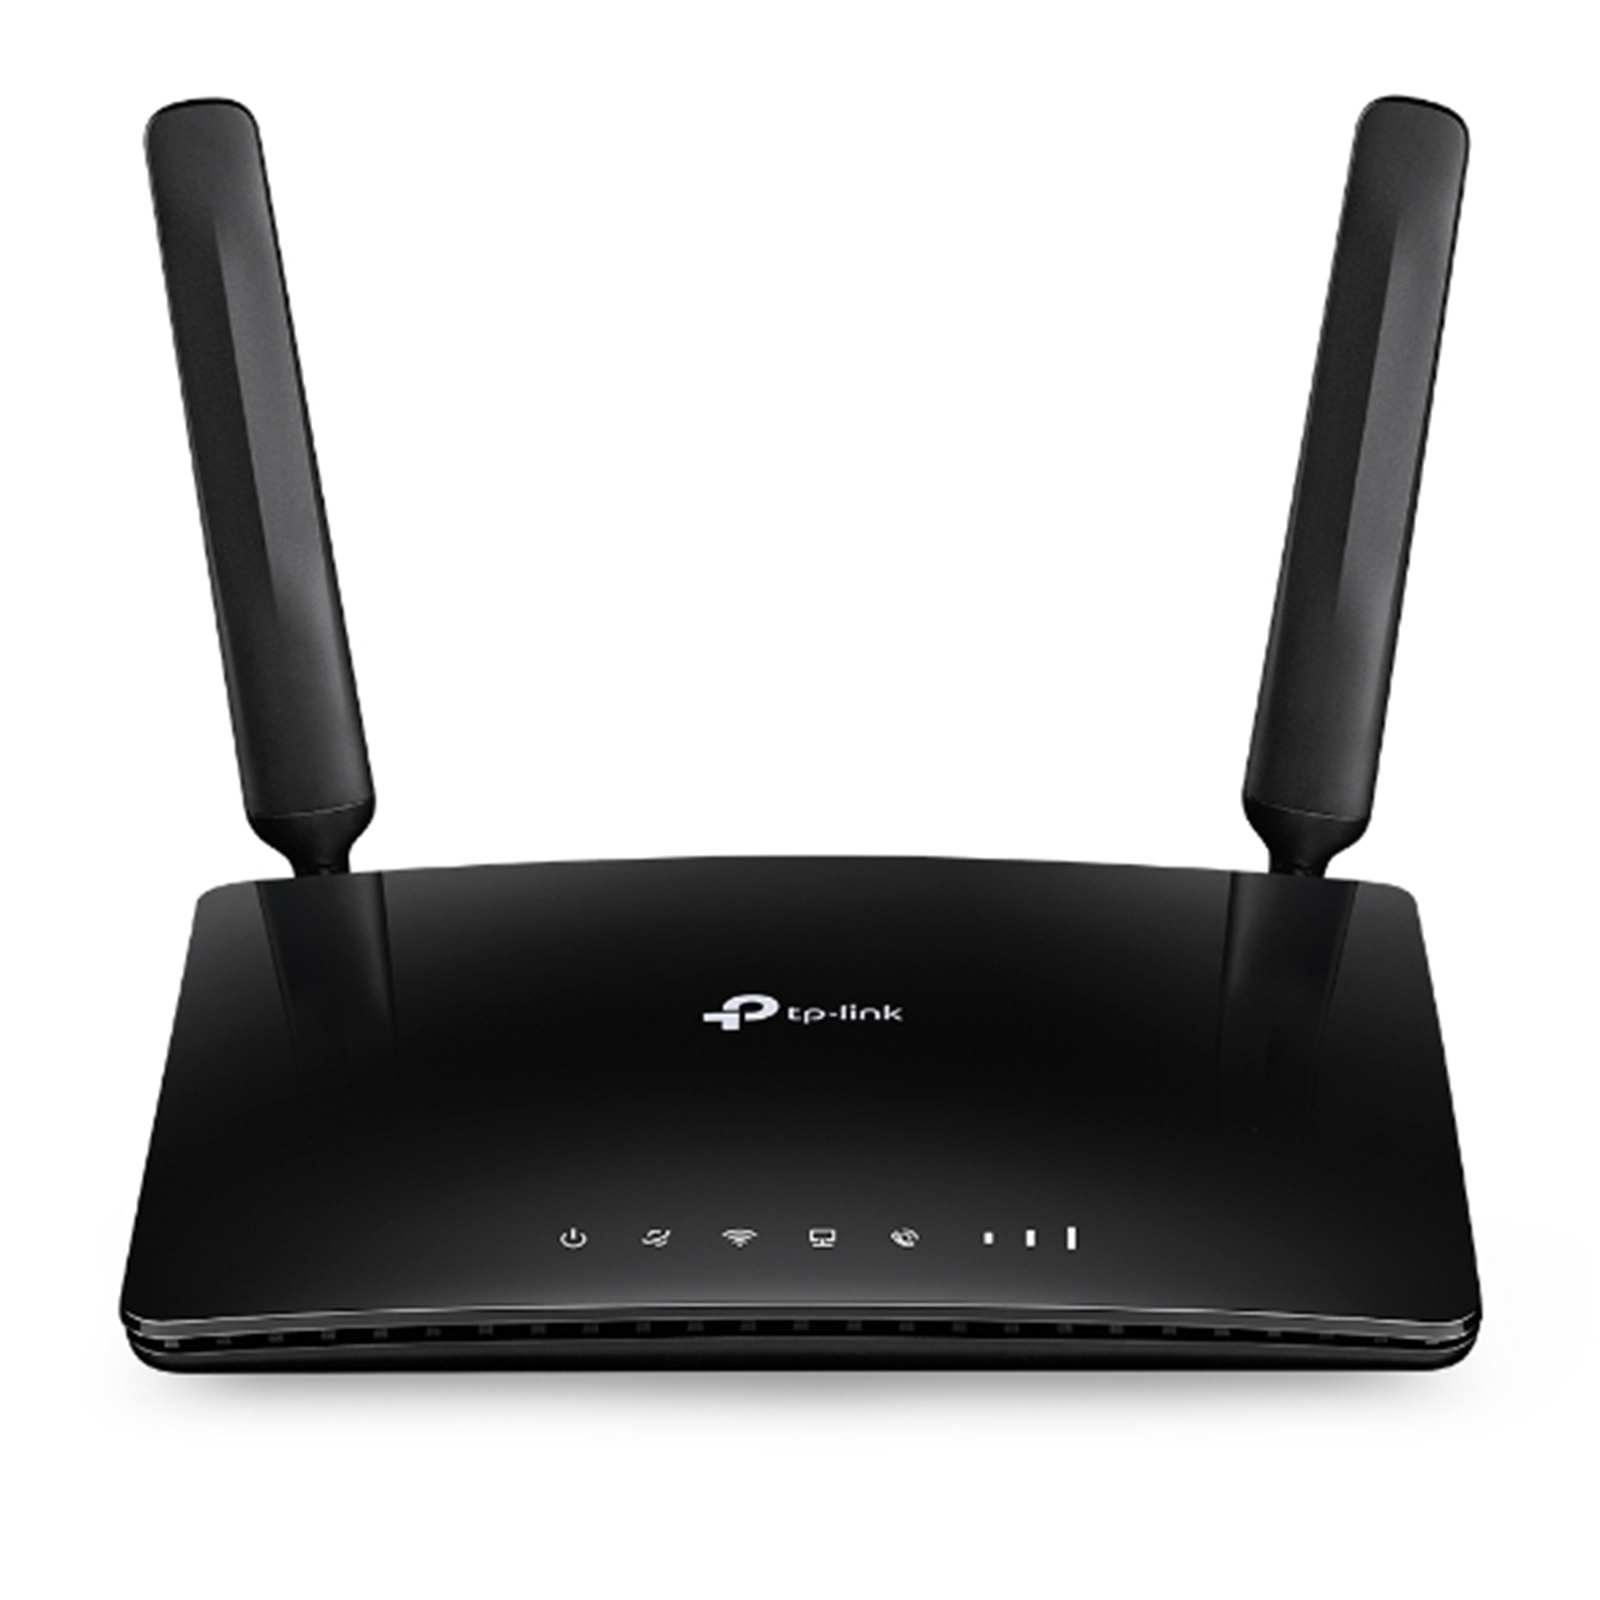 Buy the TP-Link TL-MR6500v 4G LTE Wi-Fi Router with VOIP, SIM Card Slot,...  ( TL-MR6500V ) online - PBTech.com/pacific